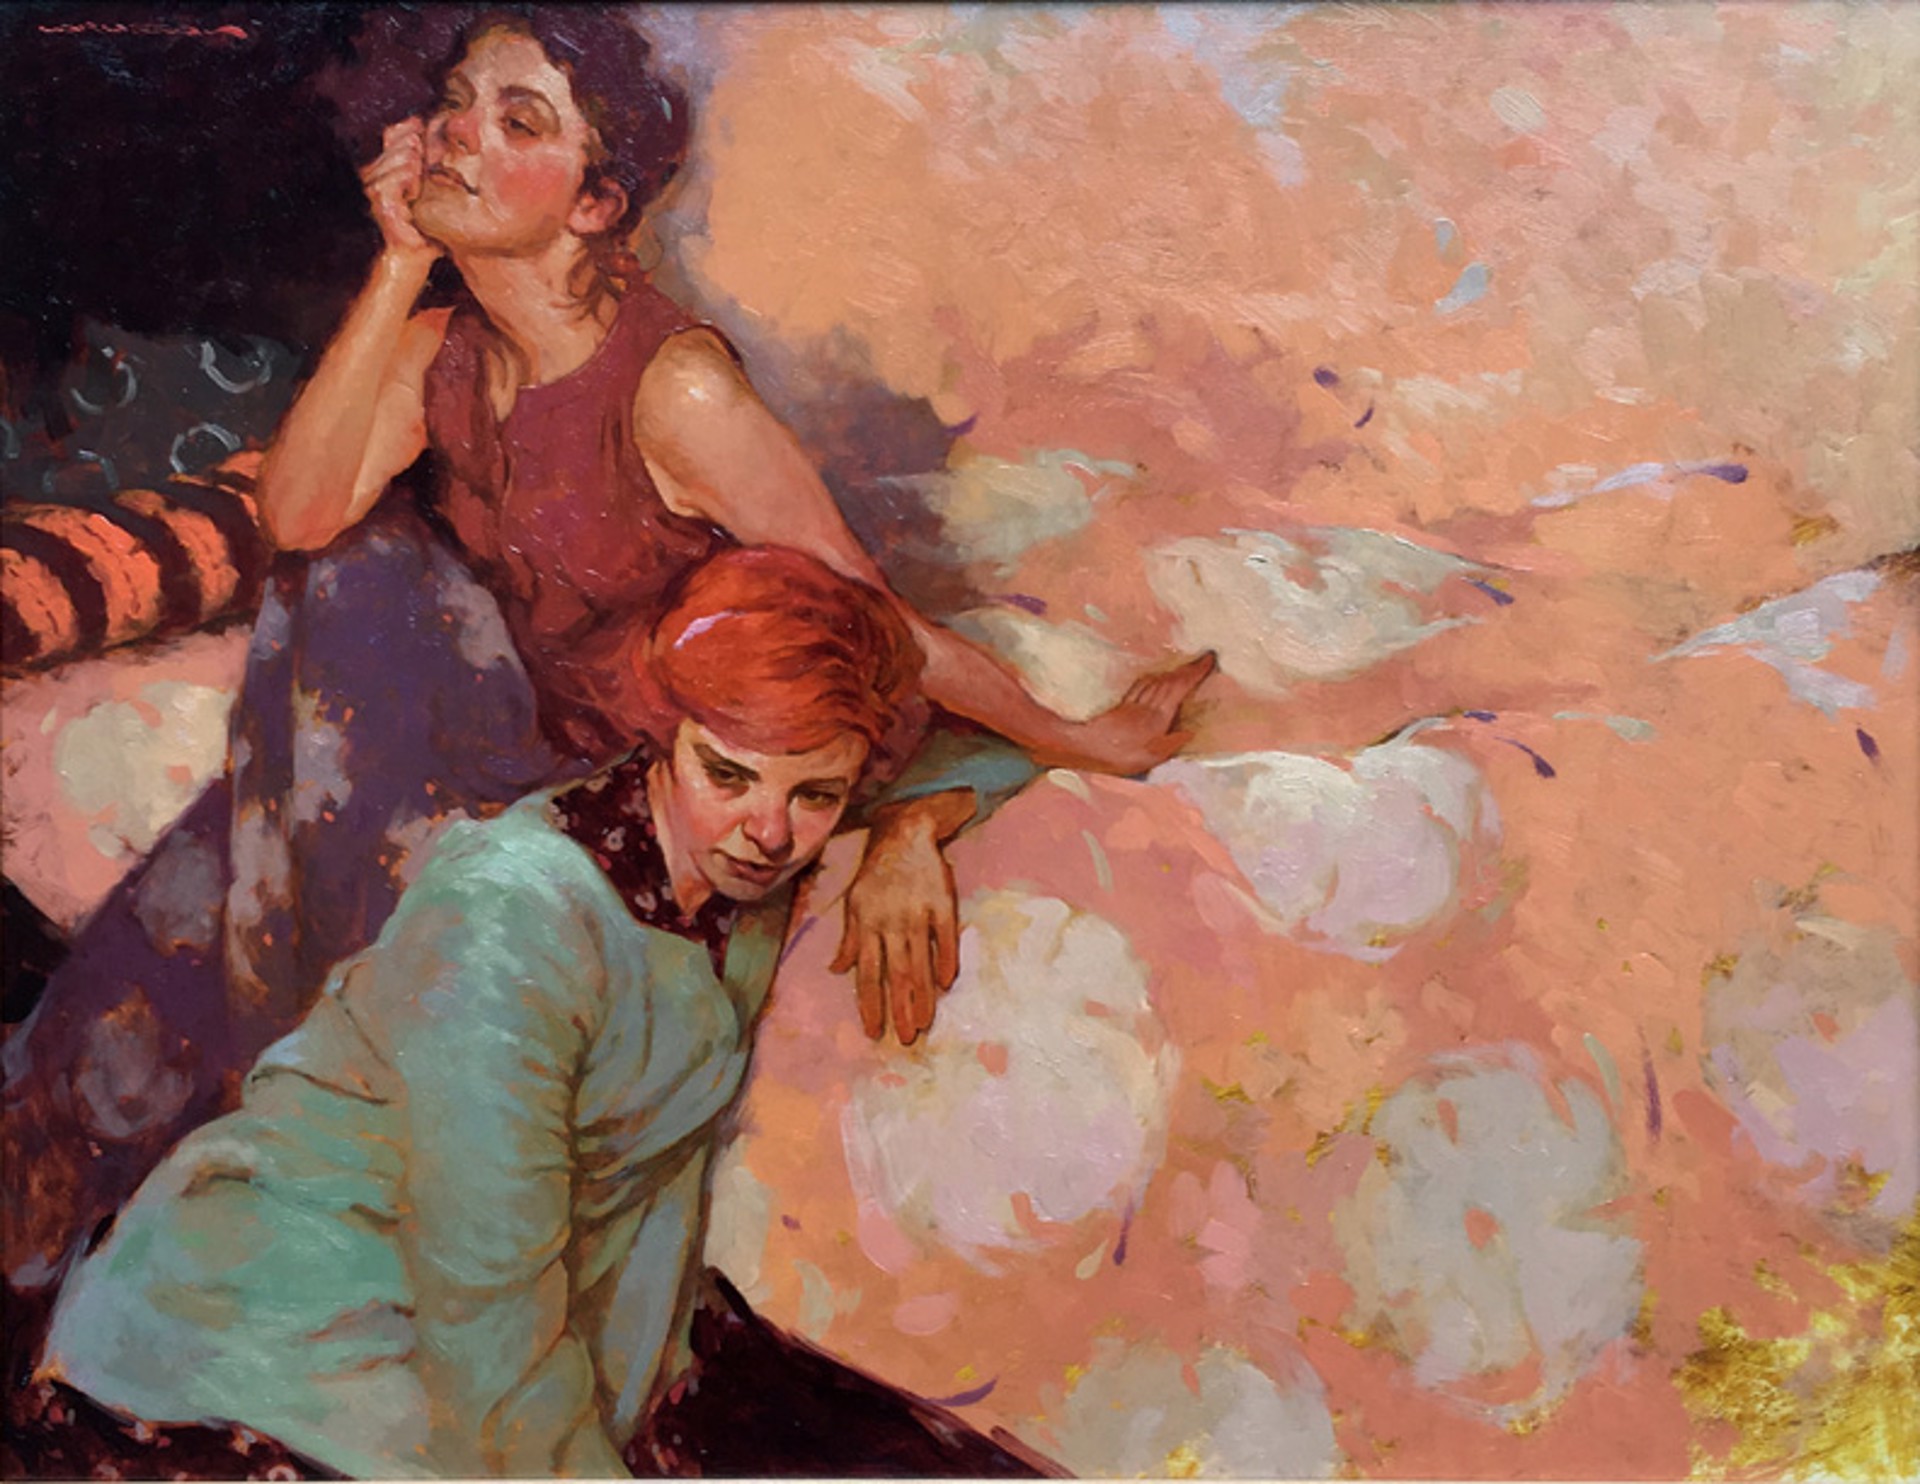 Similar Thoughts by Joseph Lorusso